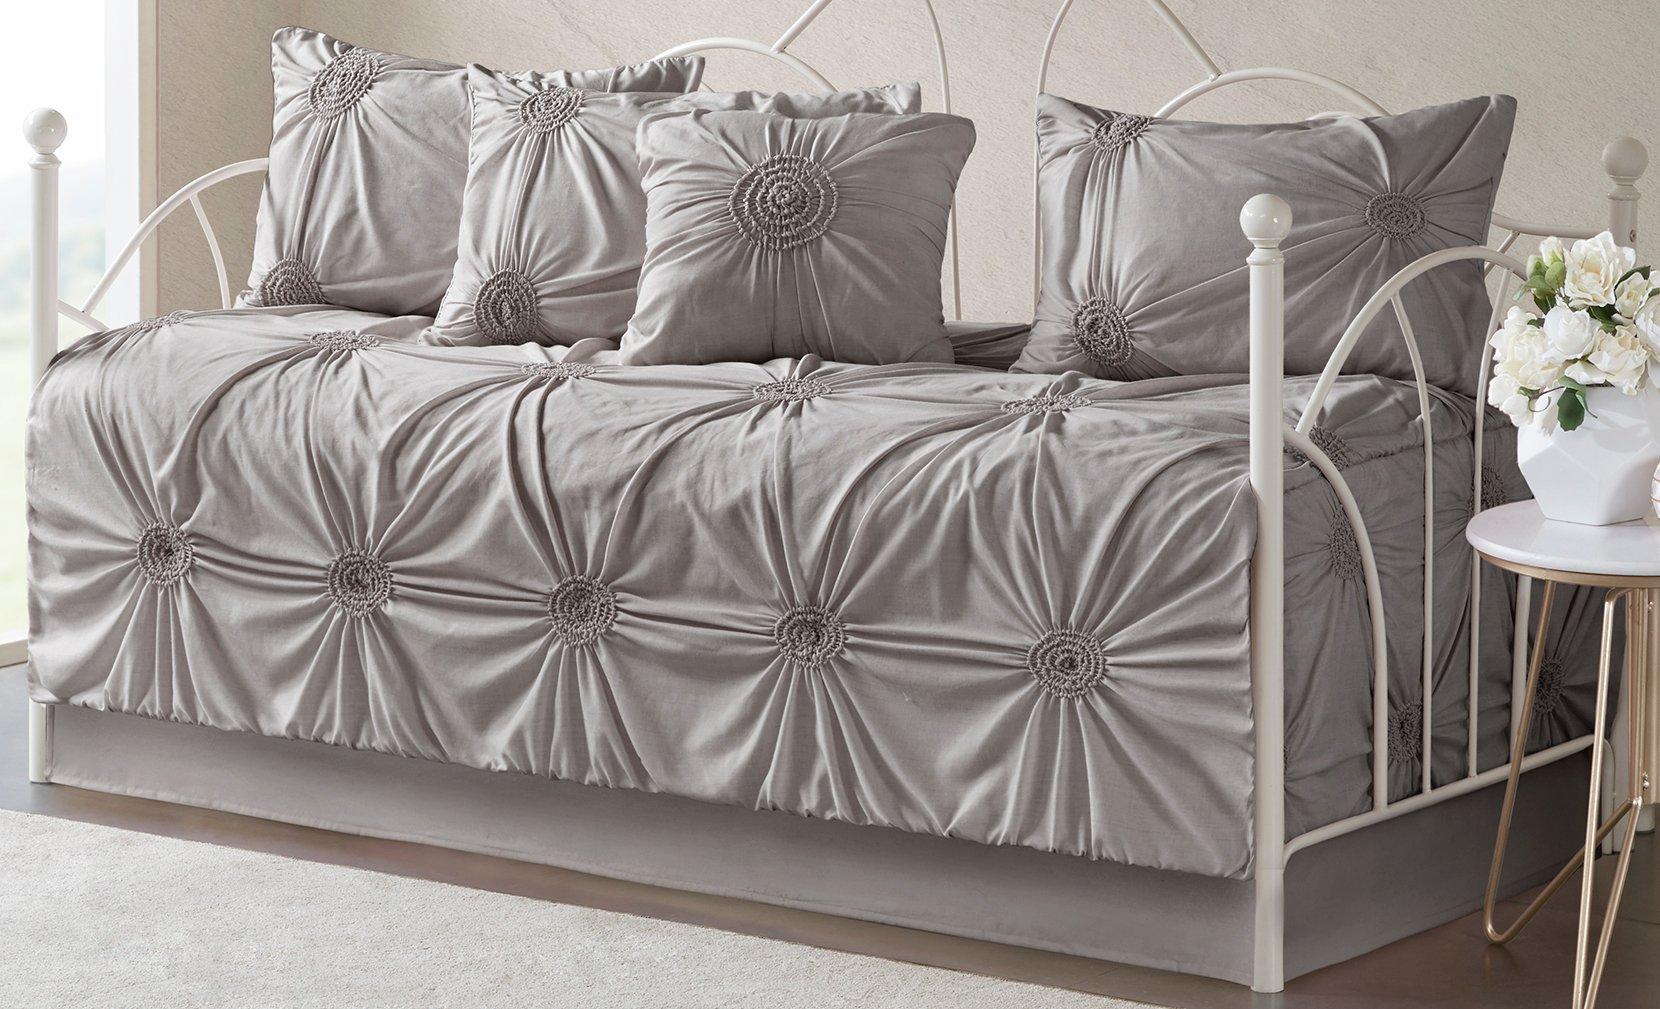 Madison Park Leila 6-pc. Daybed Cover Set